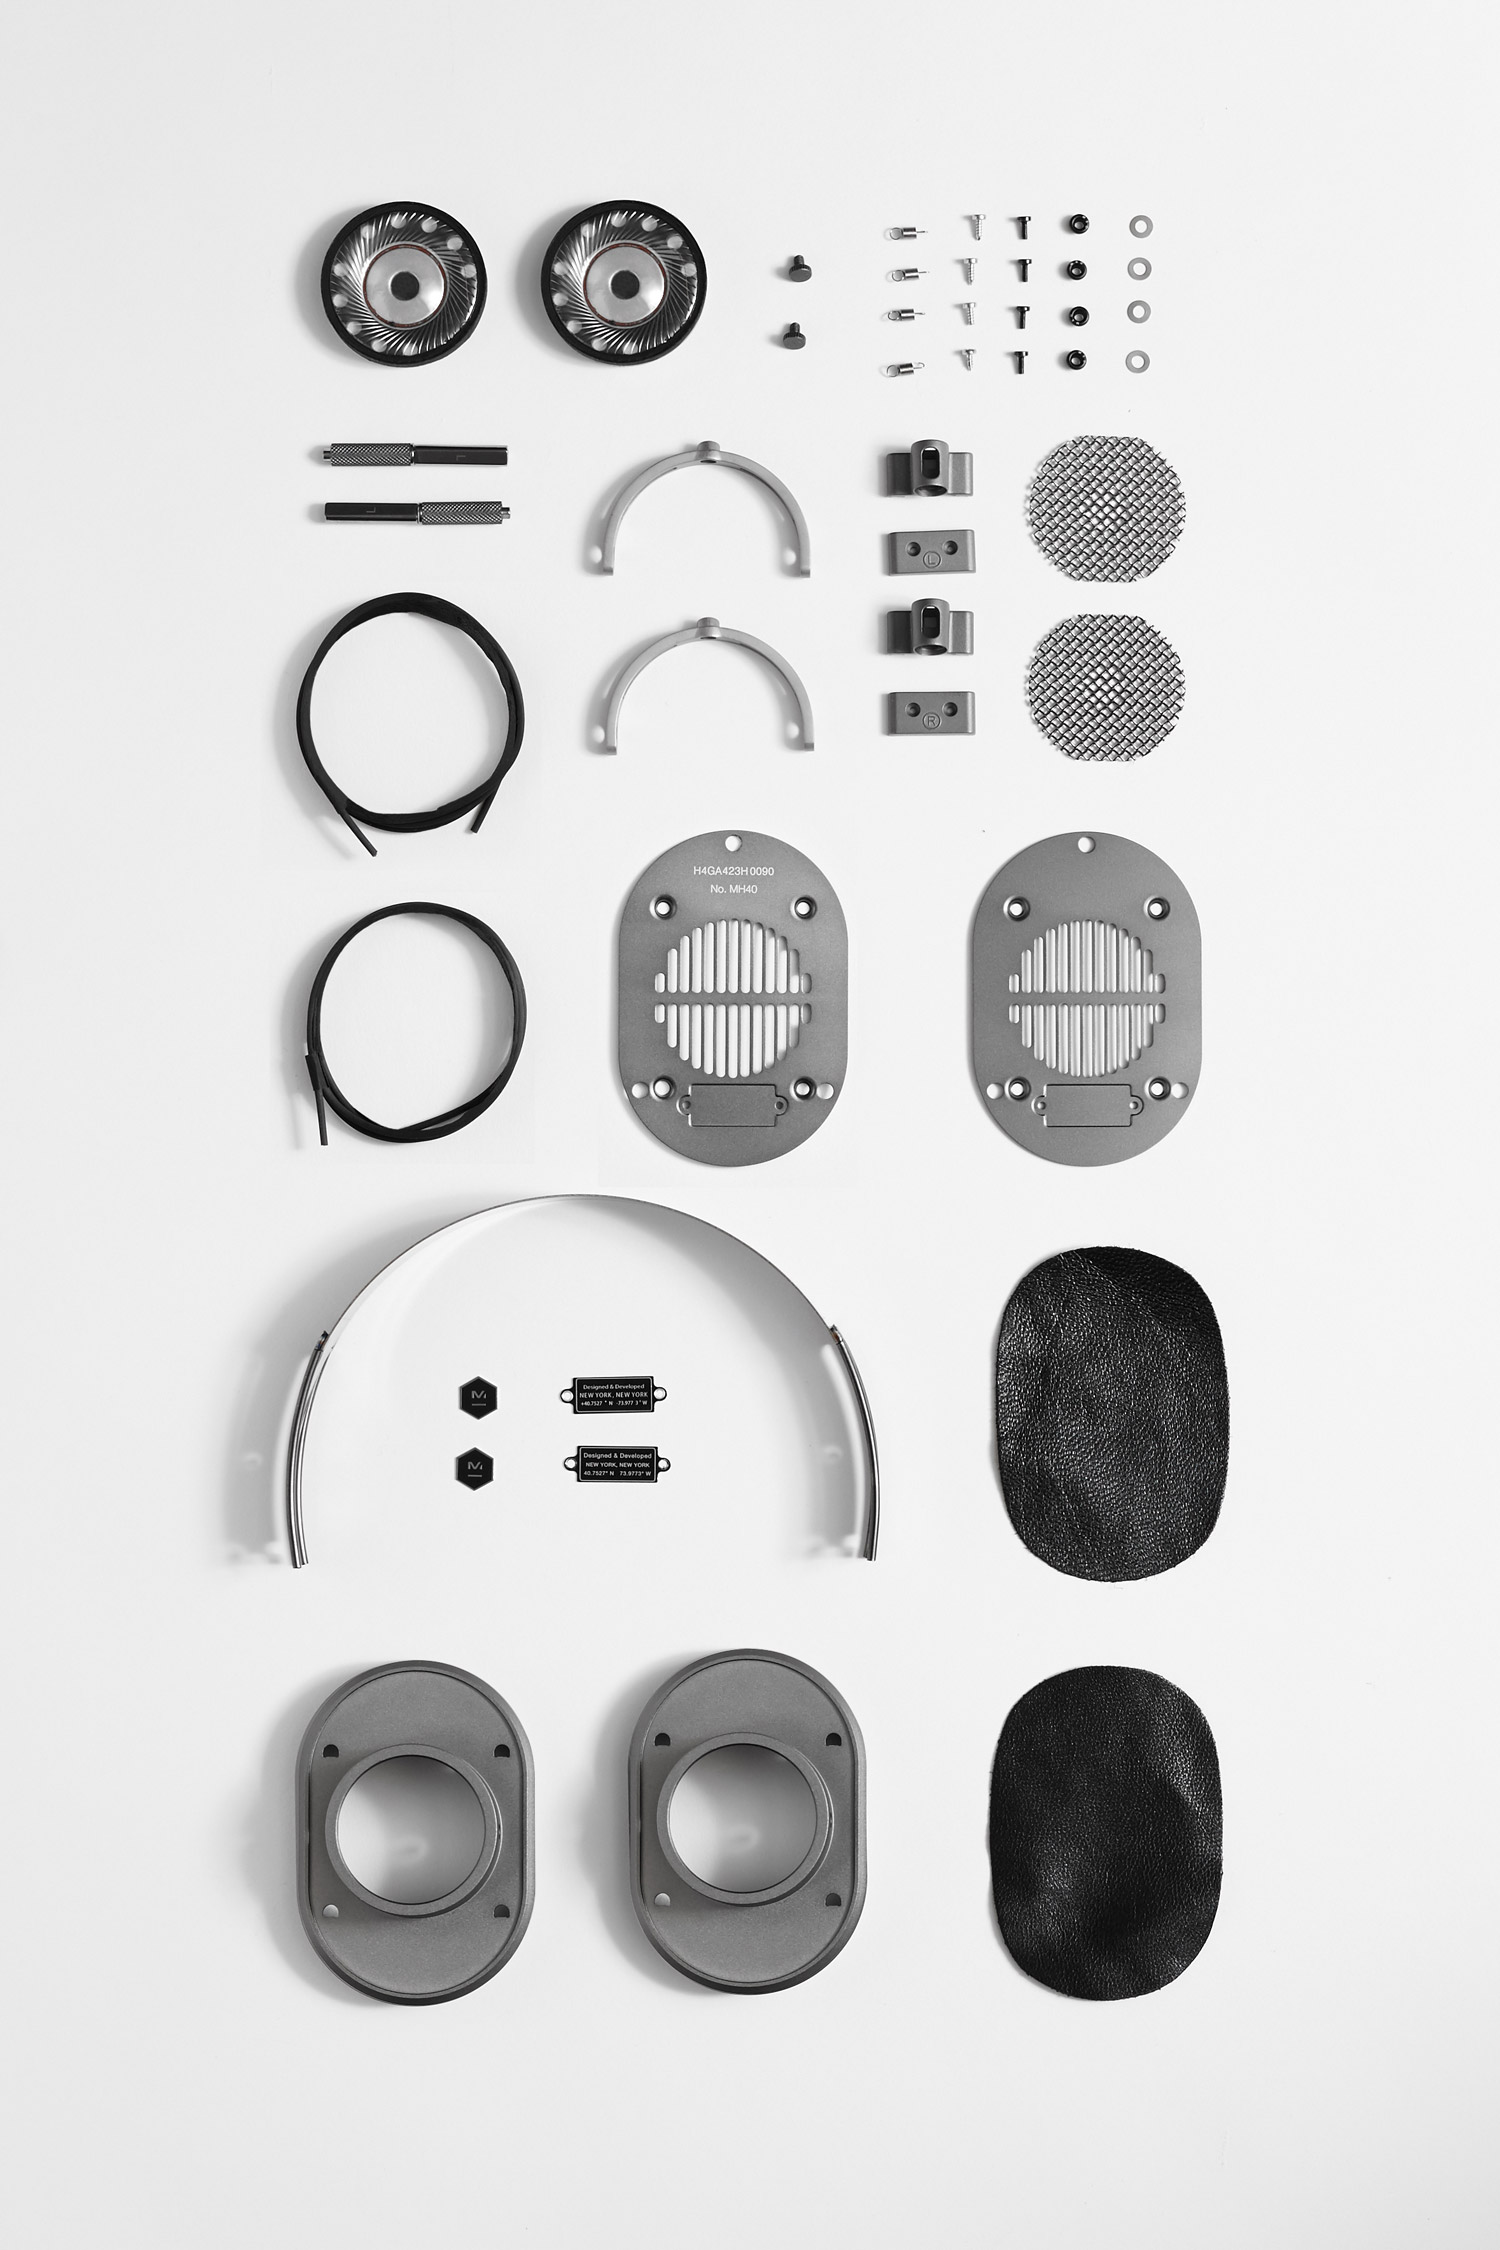 The MH40 Over Ear Headphones deconstructed